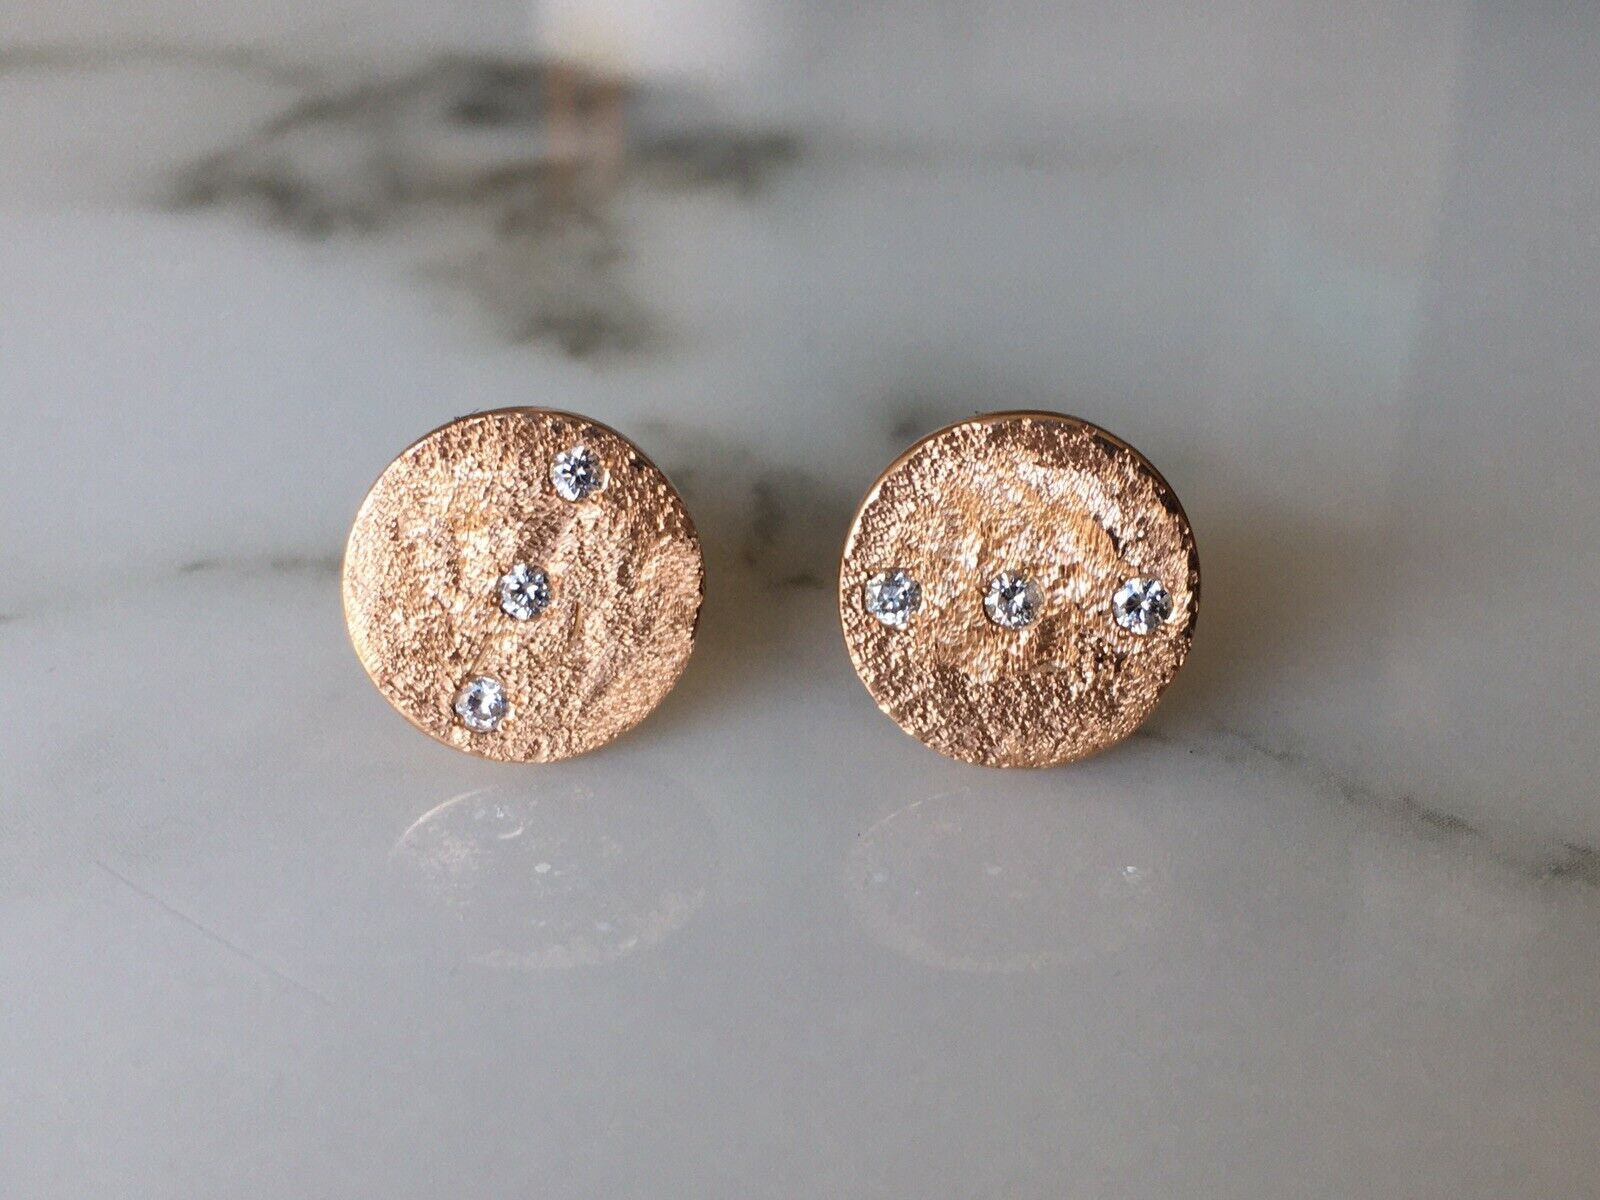 18k Rose Gold 750 and diamond cufflinks made in Italy. Amazing design quality